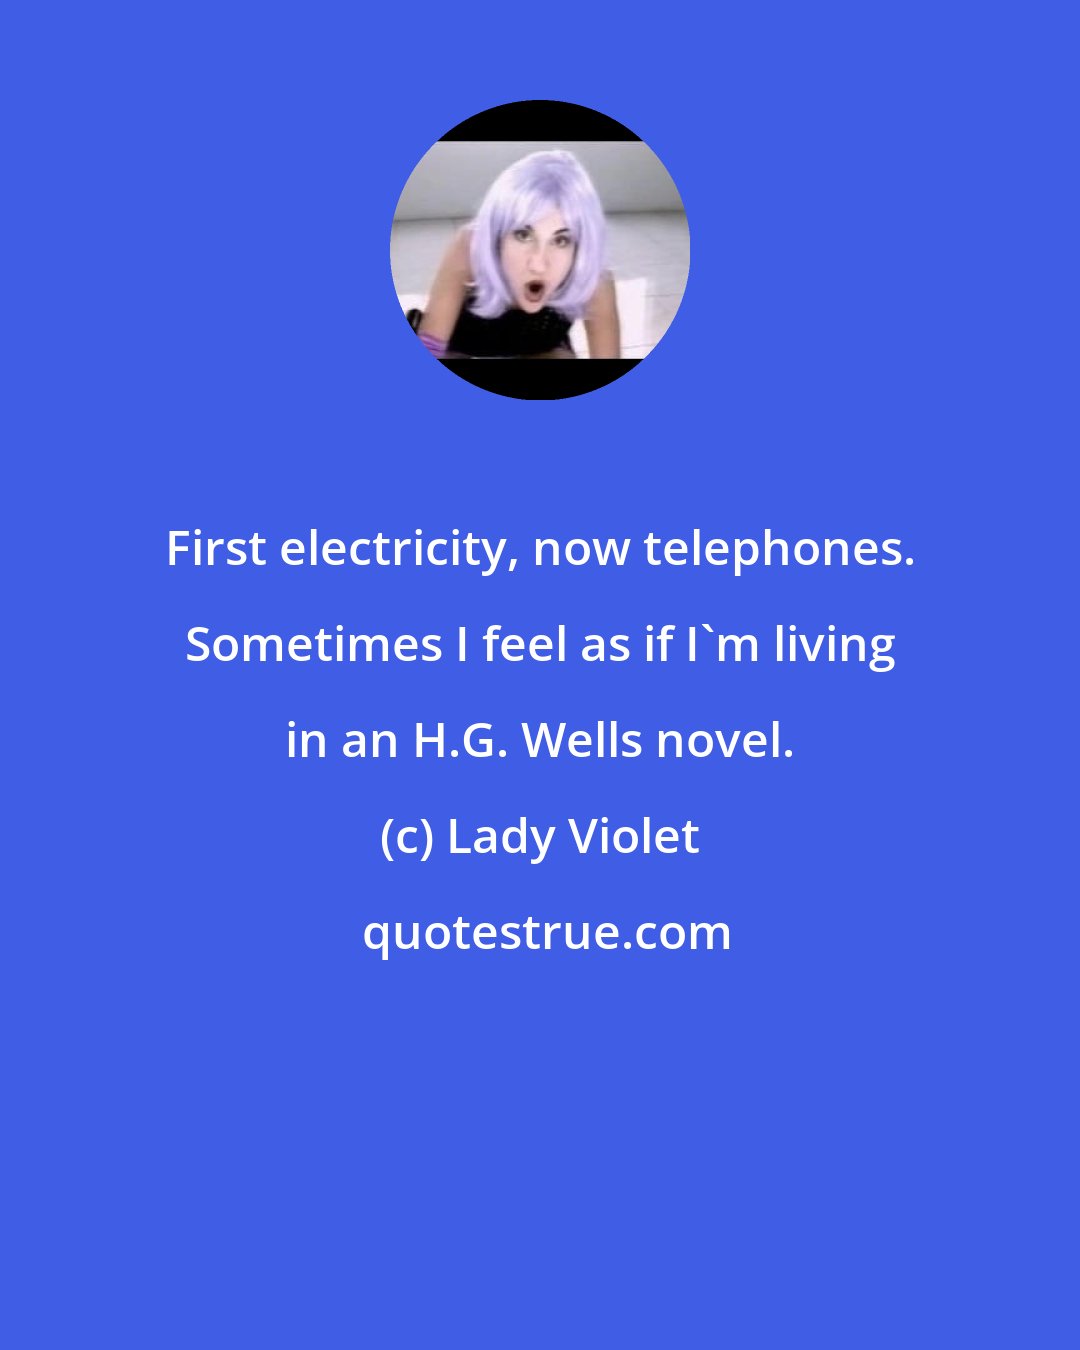 Lady Violet: First electricity, now telephones. Sometimes I feel as if I'm living in an H.G. Wells novel.